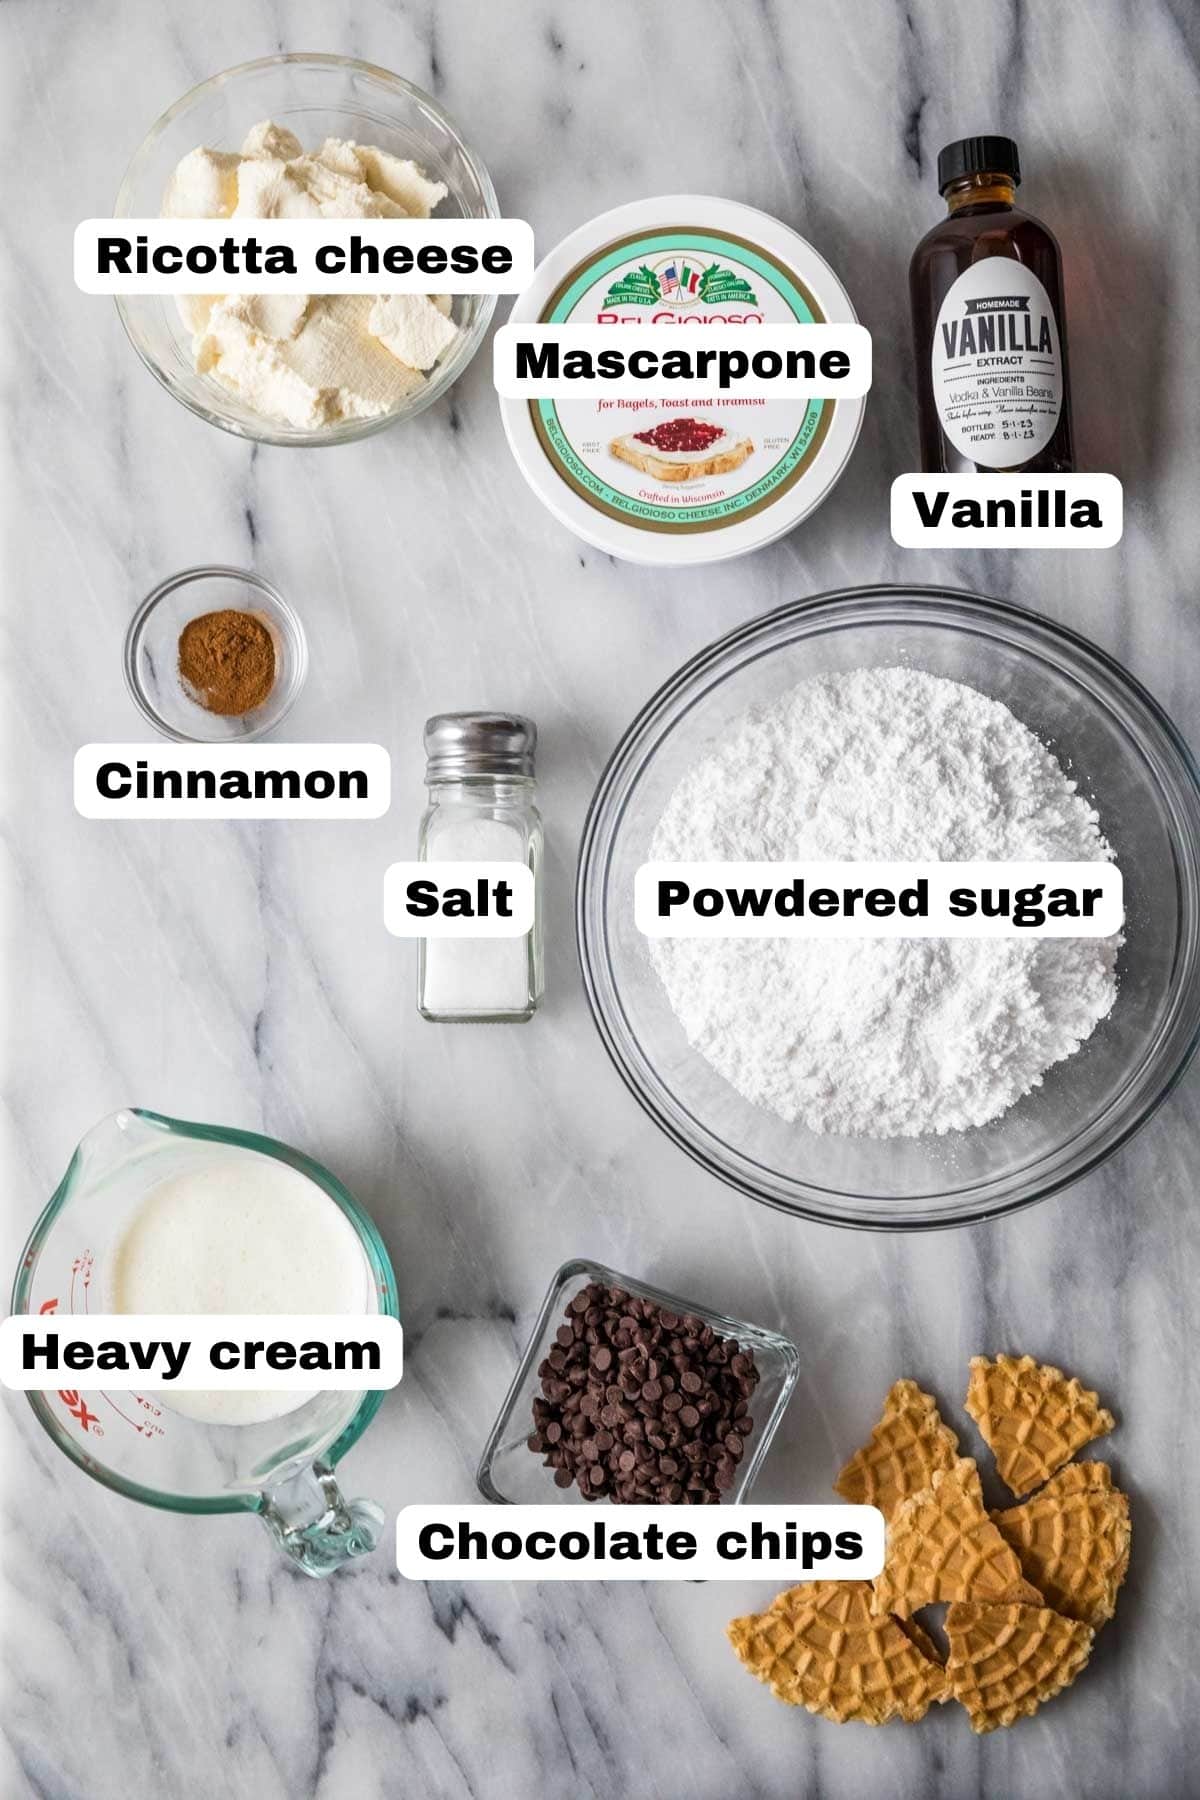 Overhead view of labelled ingredients including ricotta, mascarpone, cinnamon, and more.